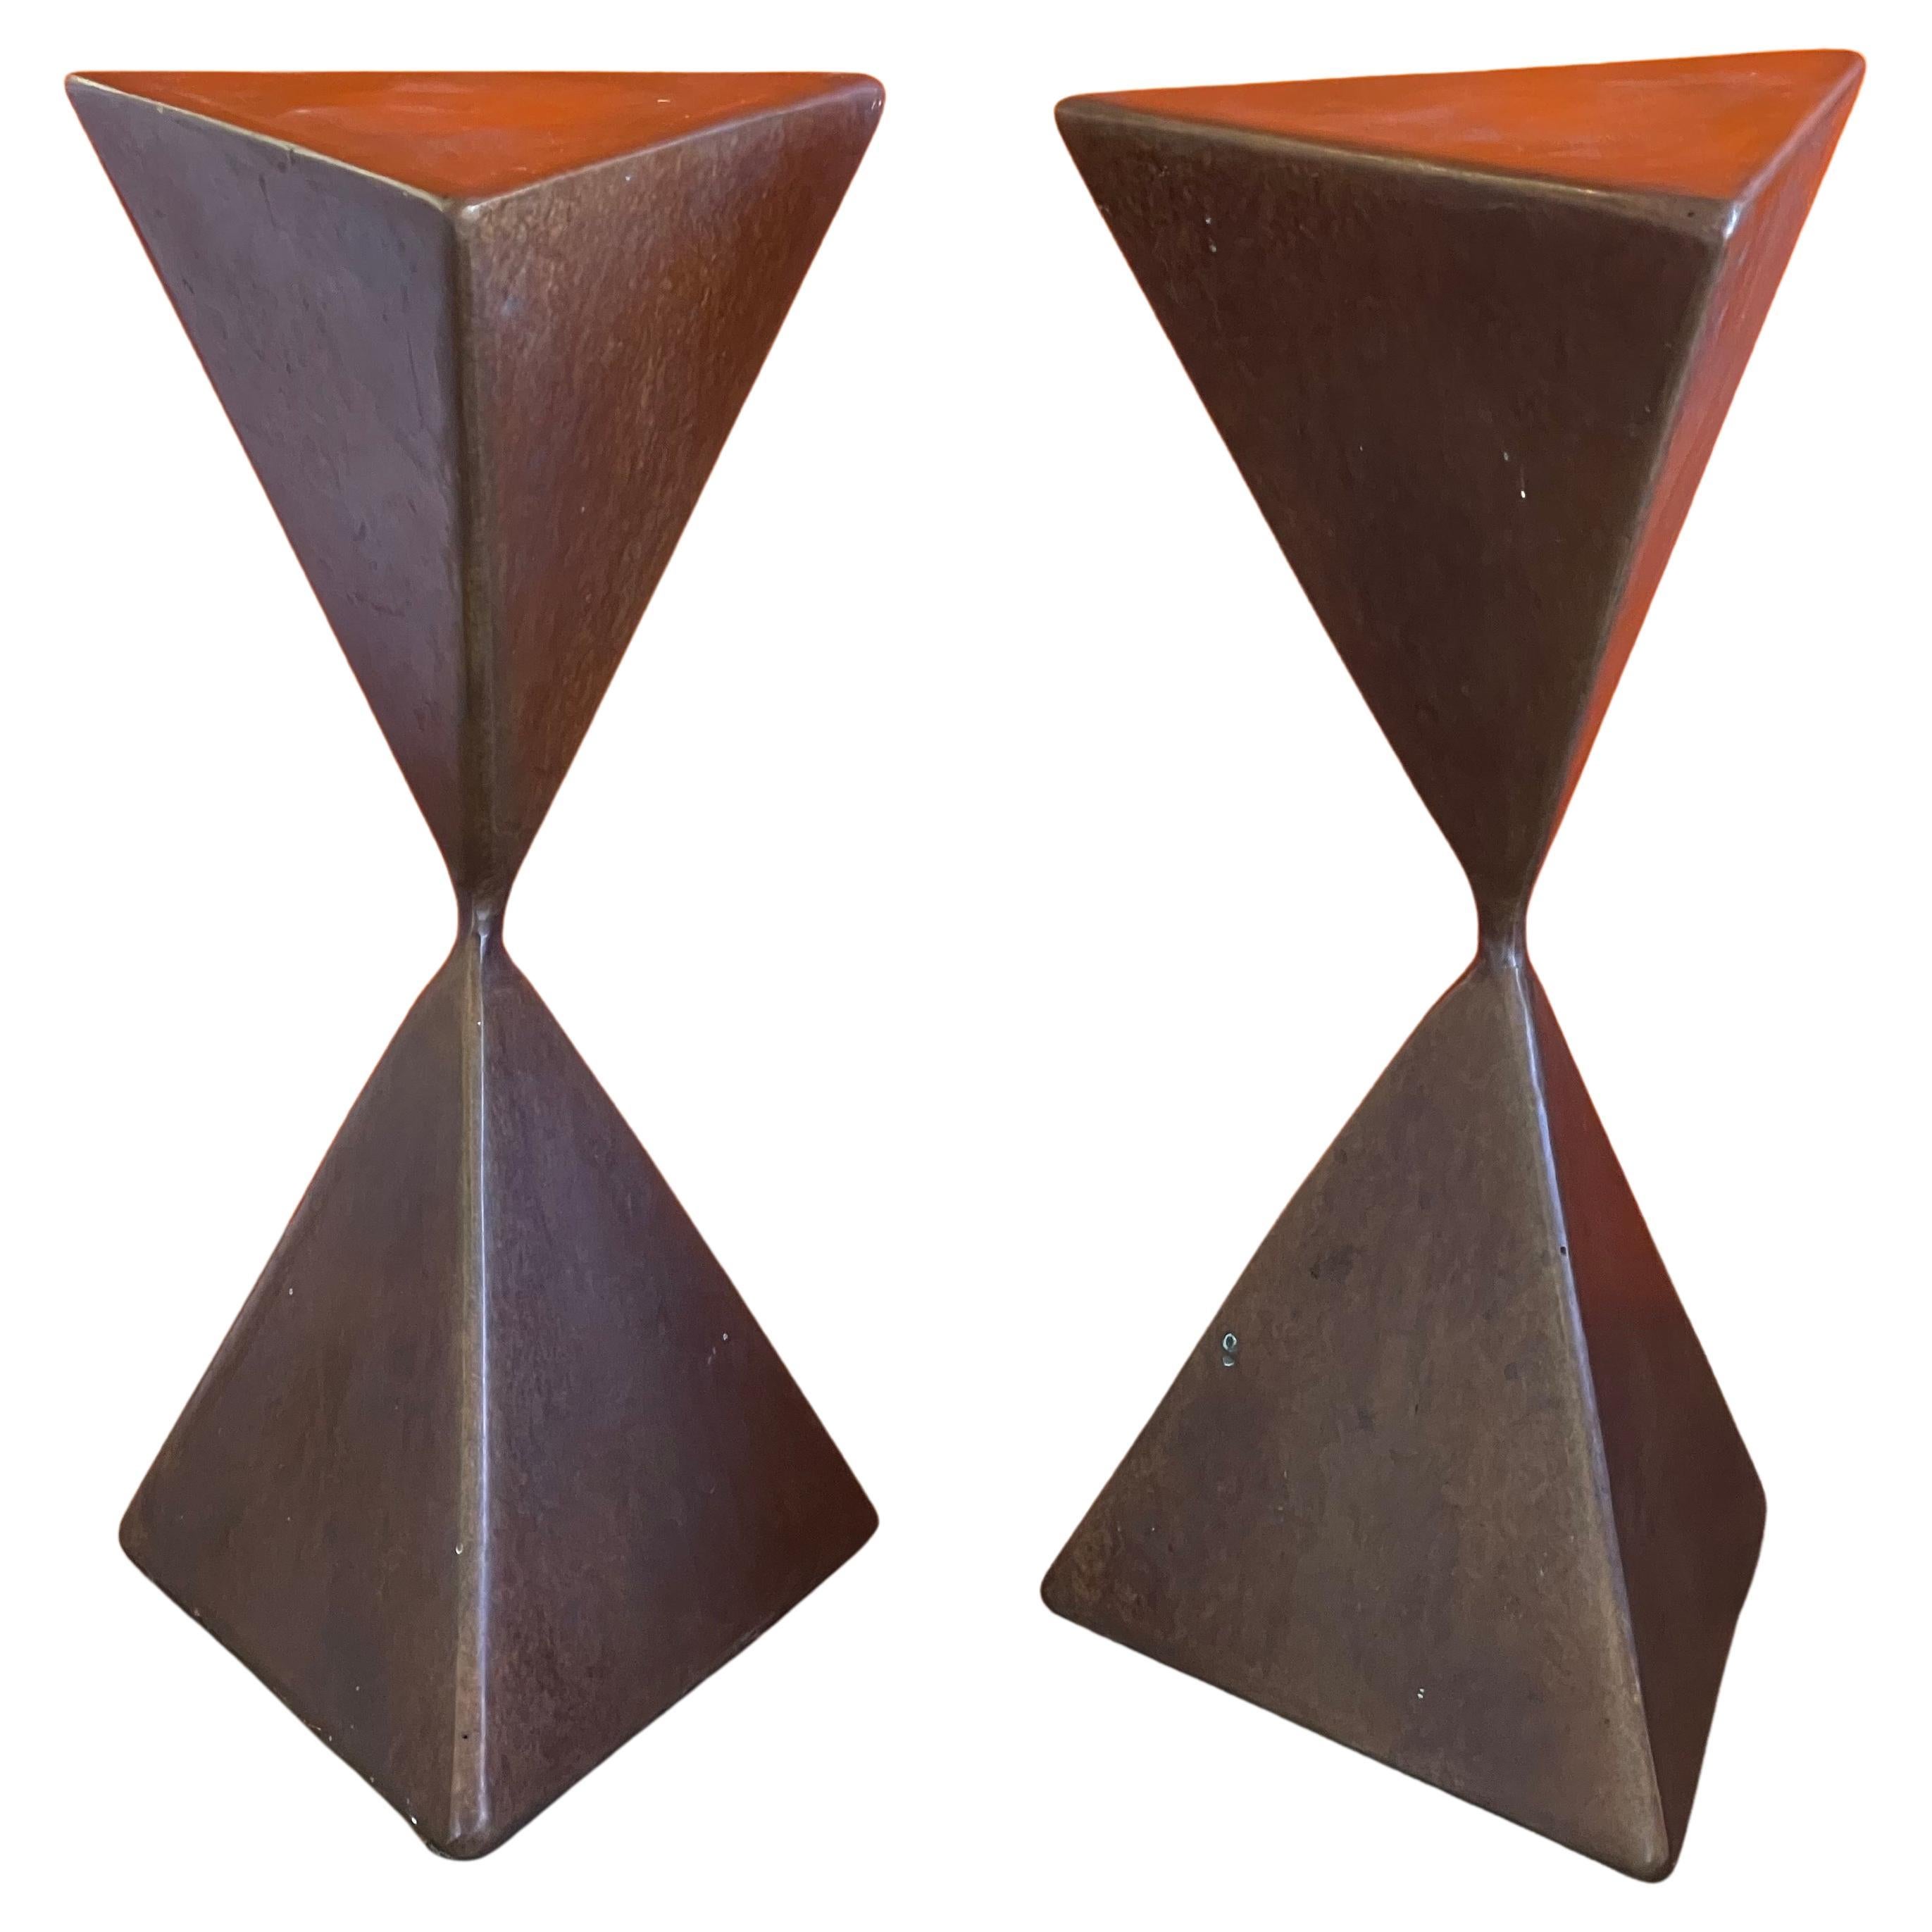 A super cool pair of bronze triangular totem pedestals by Rod Kagan circa 2007. The set can be used as small display pedestals or as decorative art sculptures.  They are in very good condition with a great patina and superbly balanced; each piece